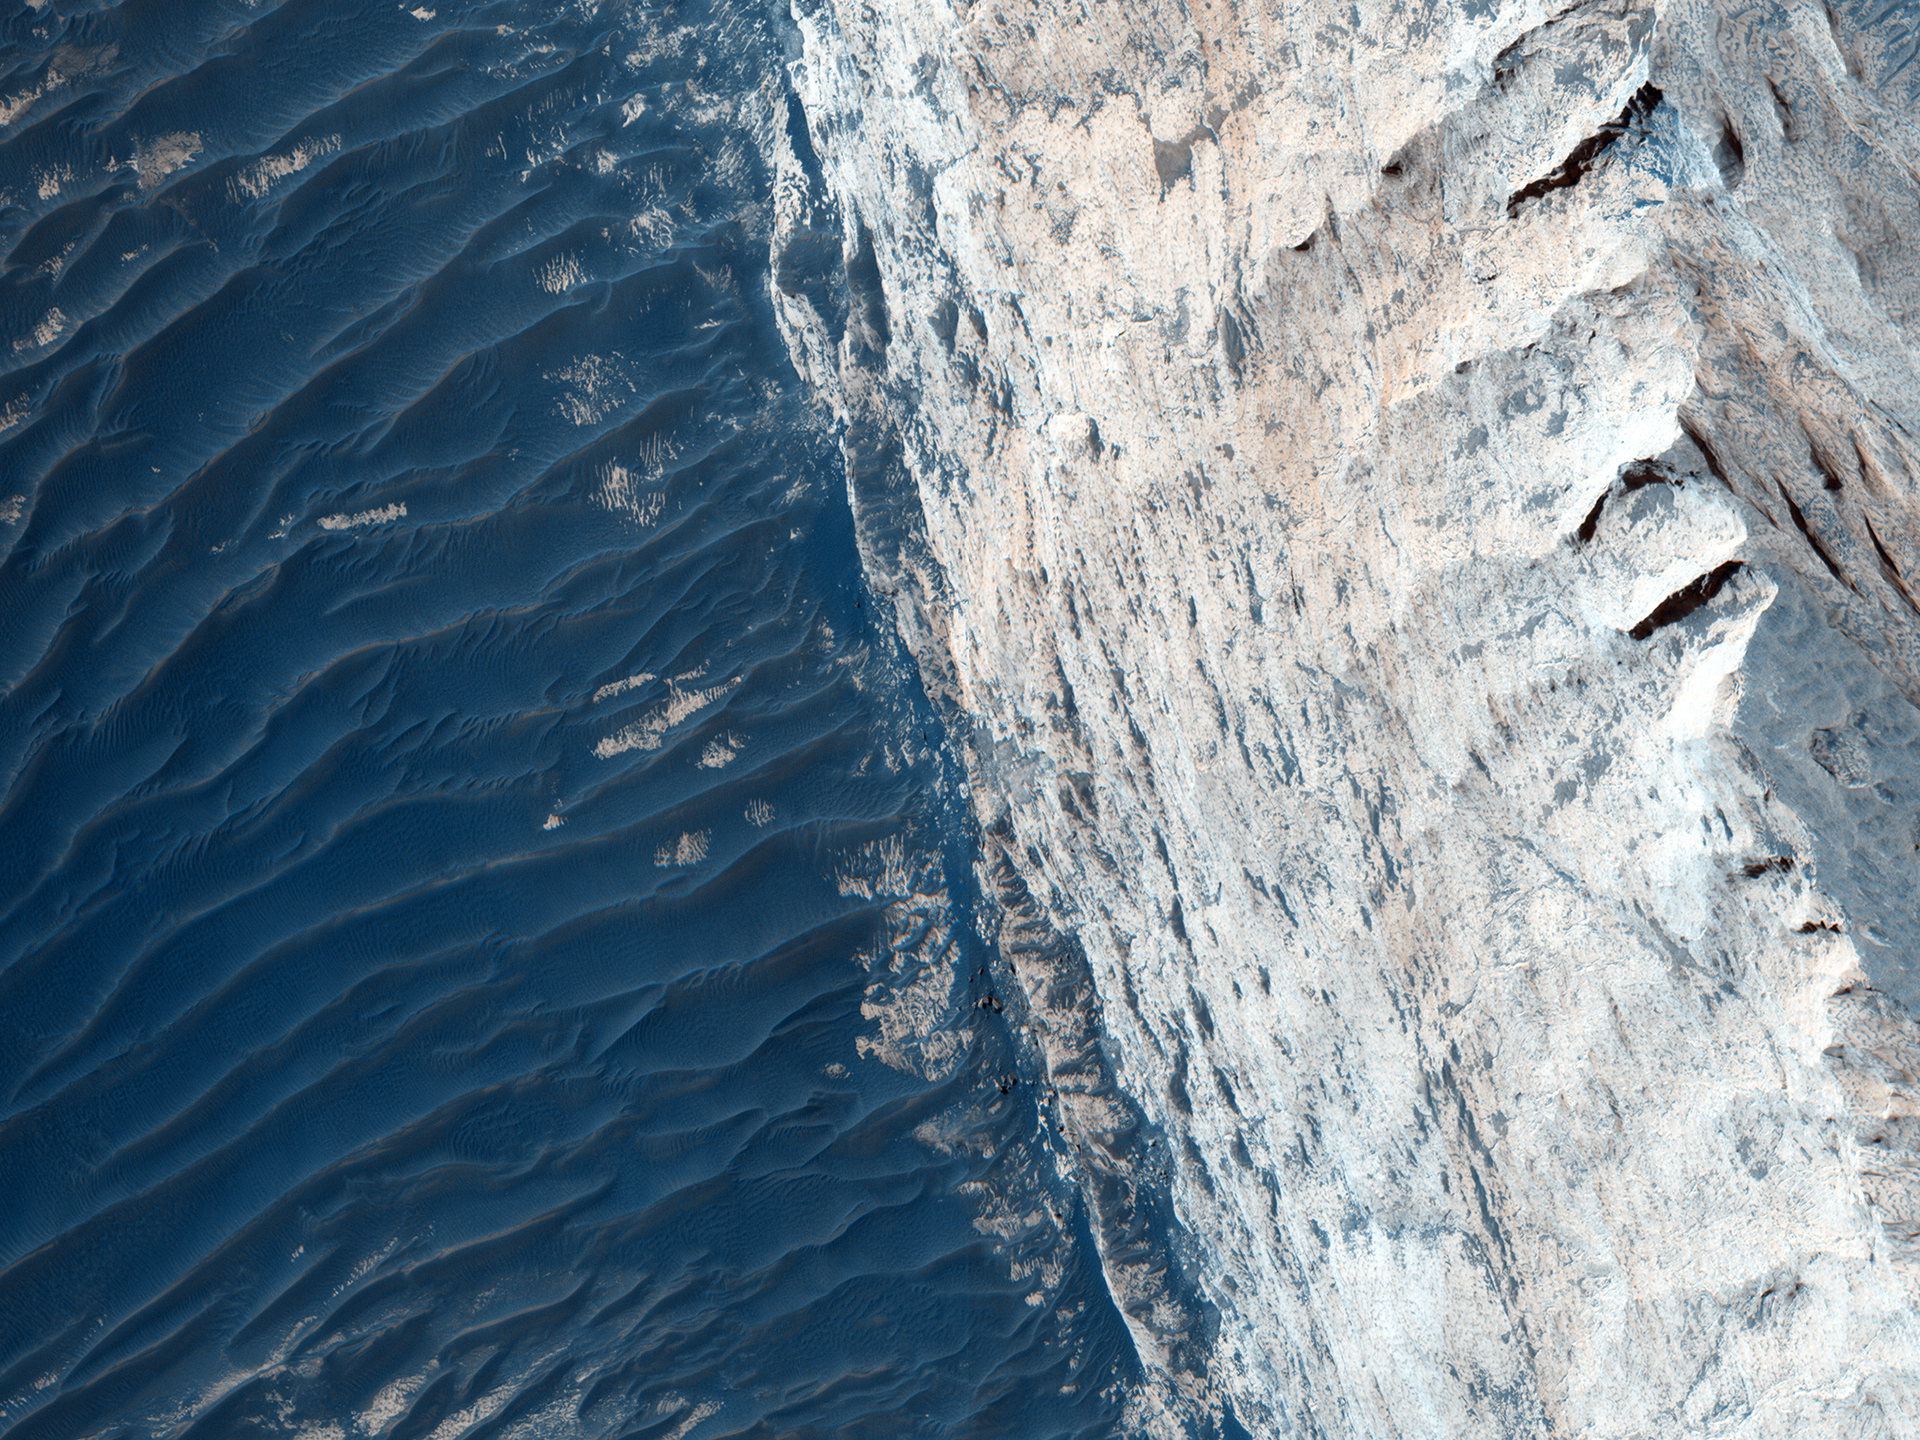 Layers And Fractures In Ophir Chasma - Valles Marineris Nasa Photograph - HD Wallpaper 